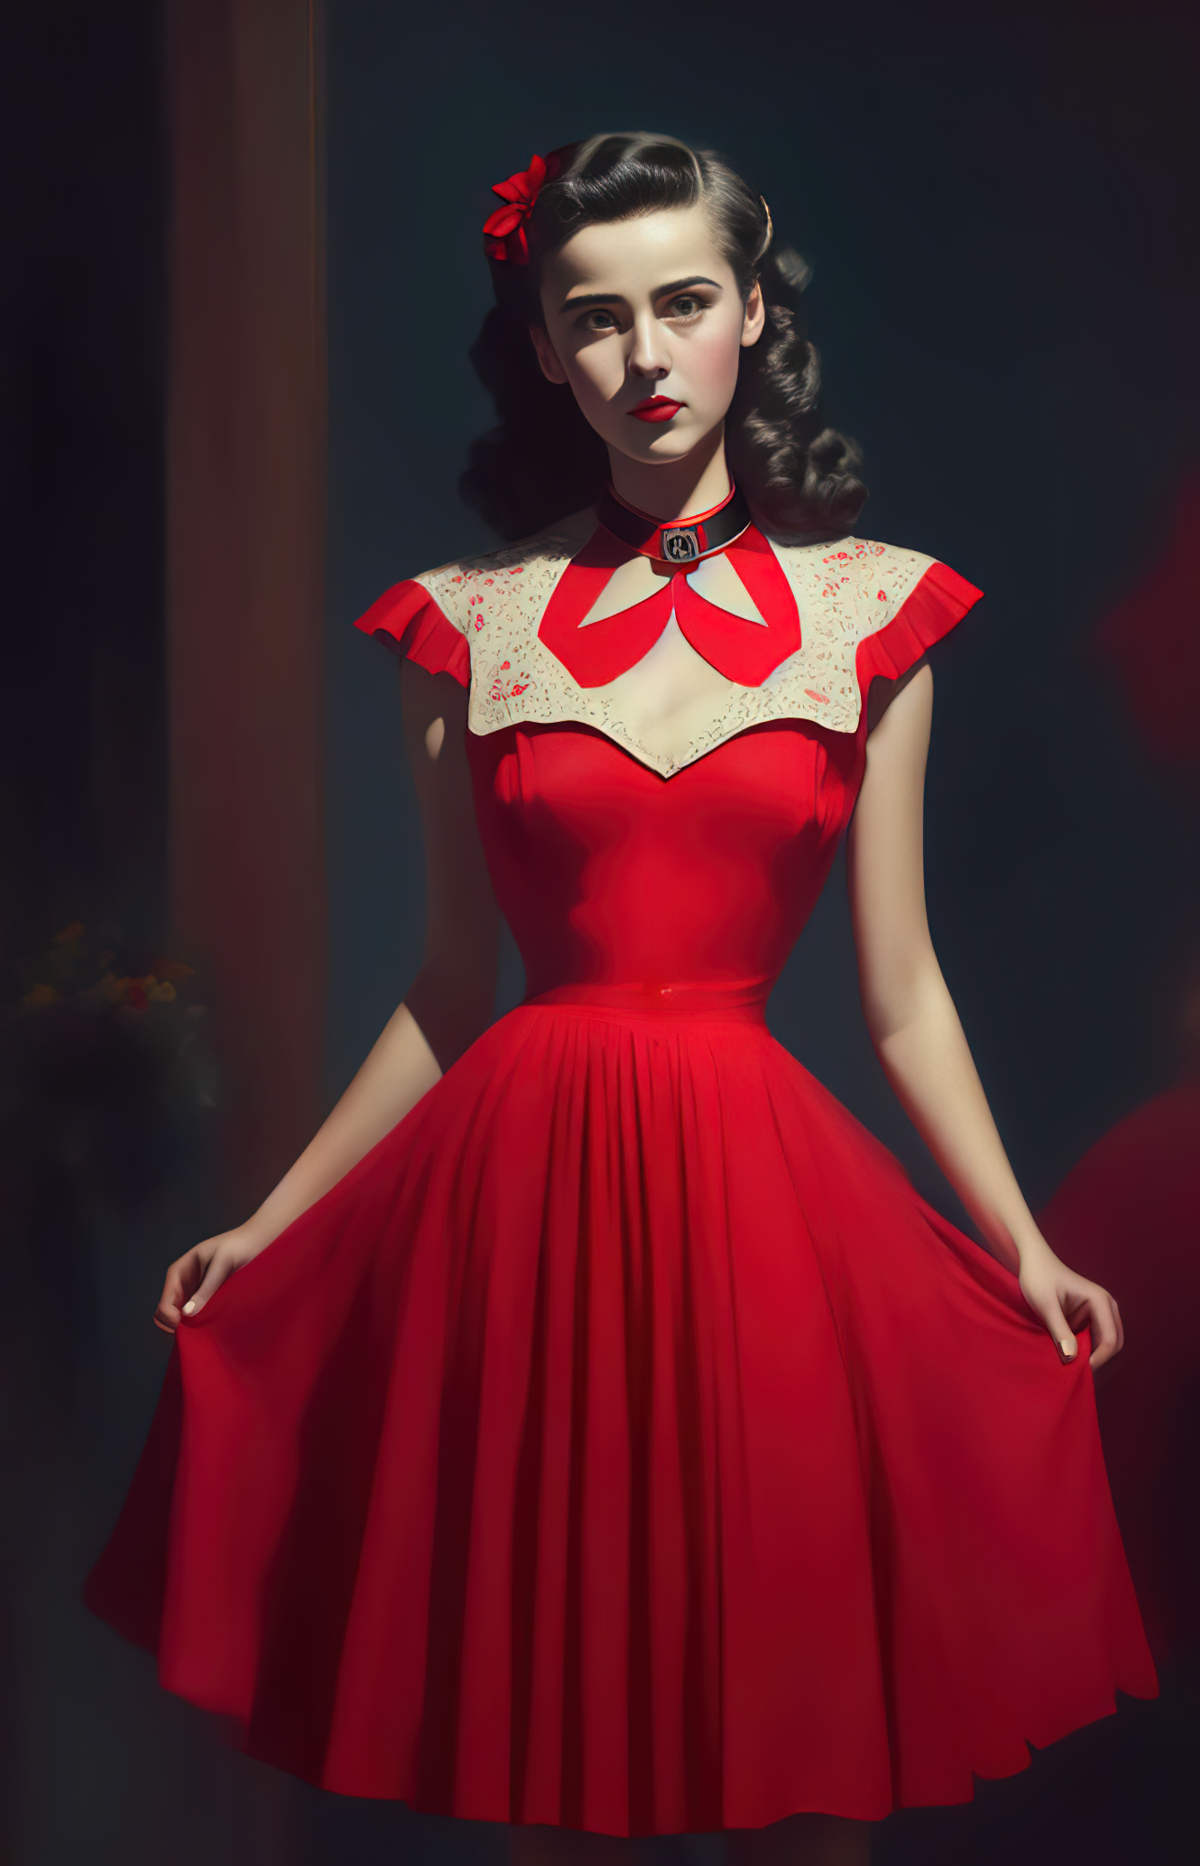 Red Dress—1946 by Alice Munro Short Story Analysis